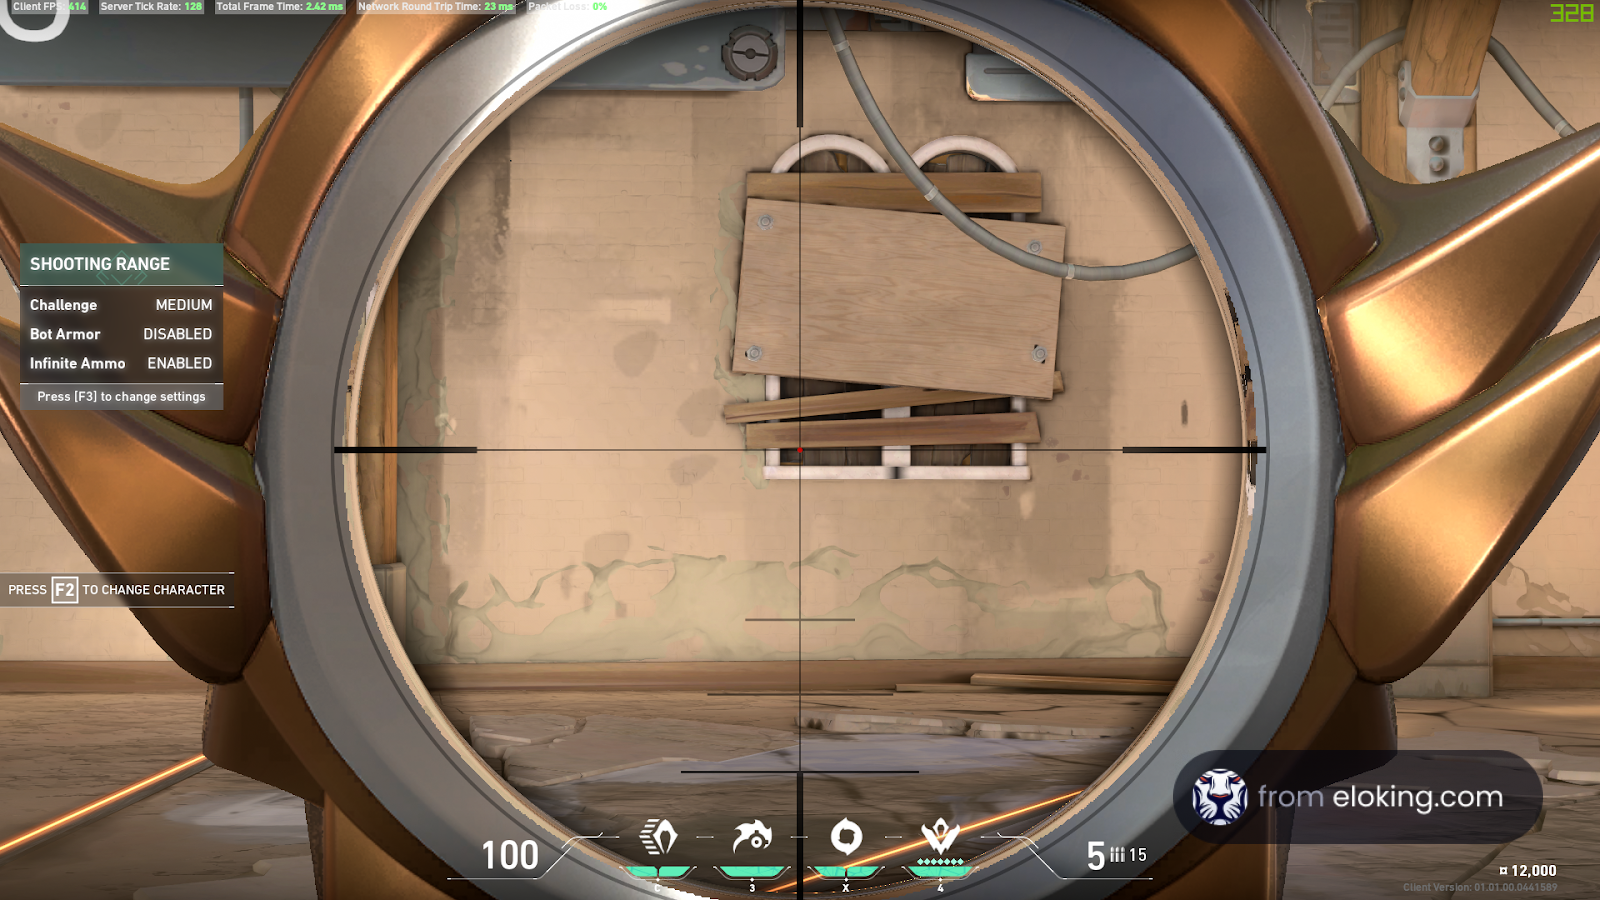 First-person shooter game view through a sniper scope